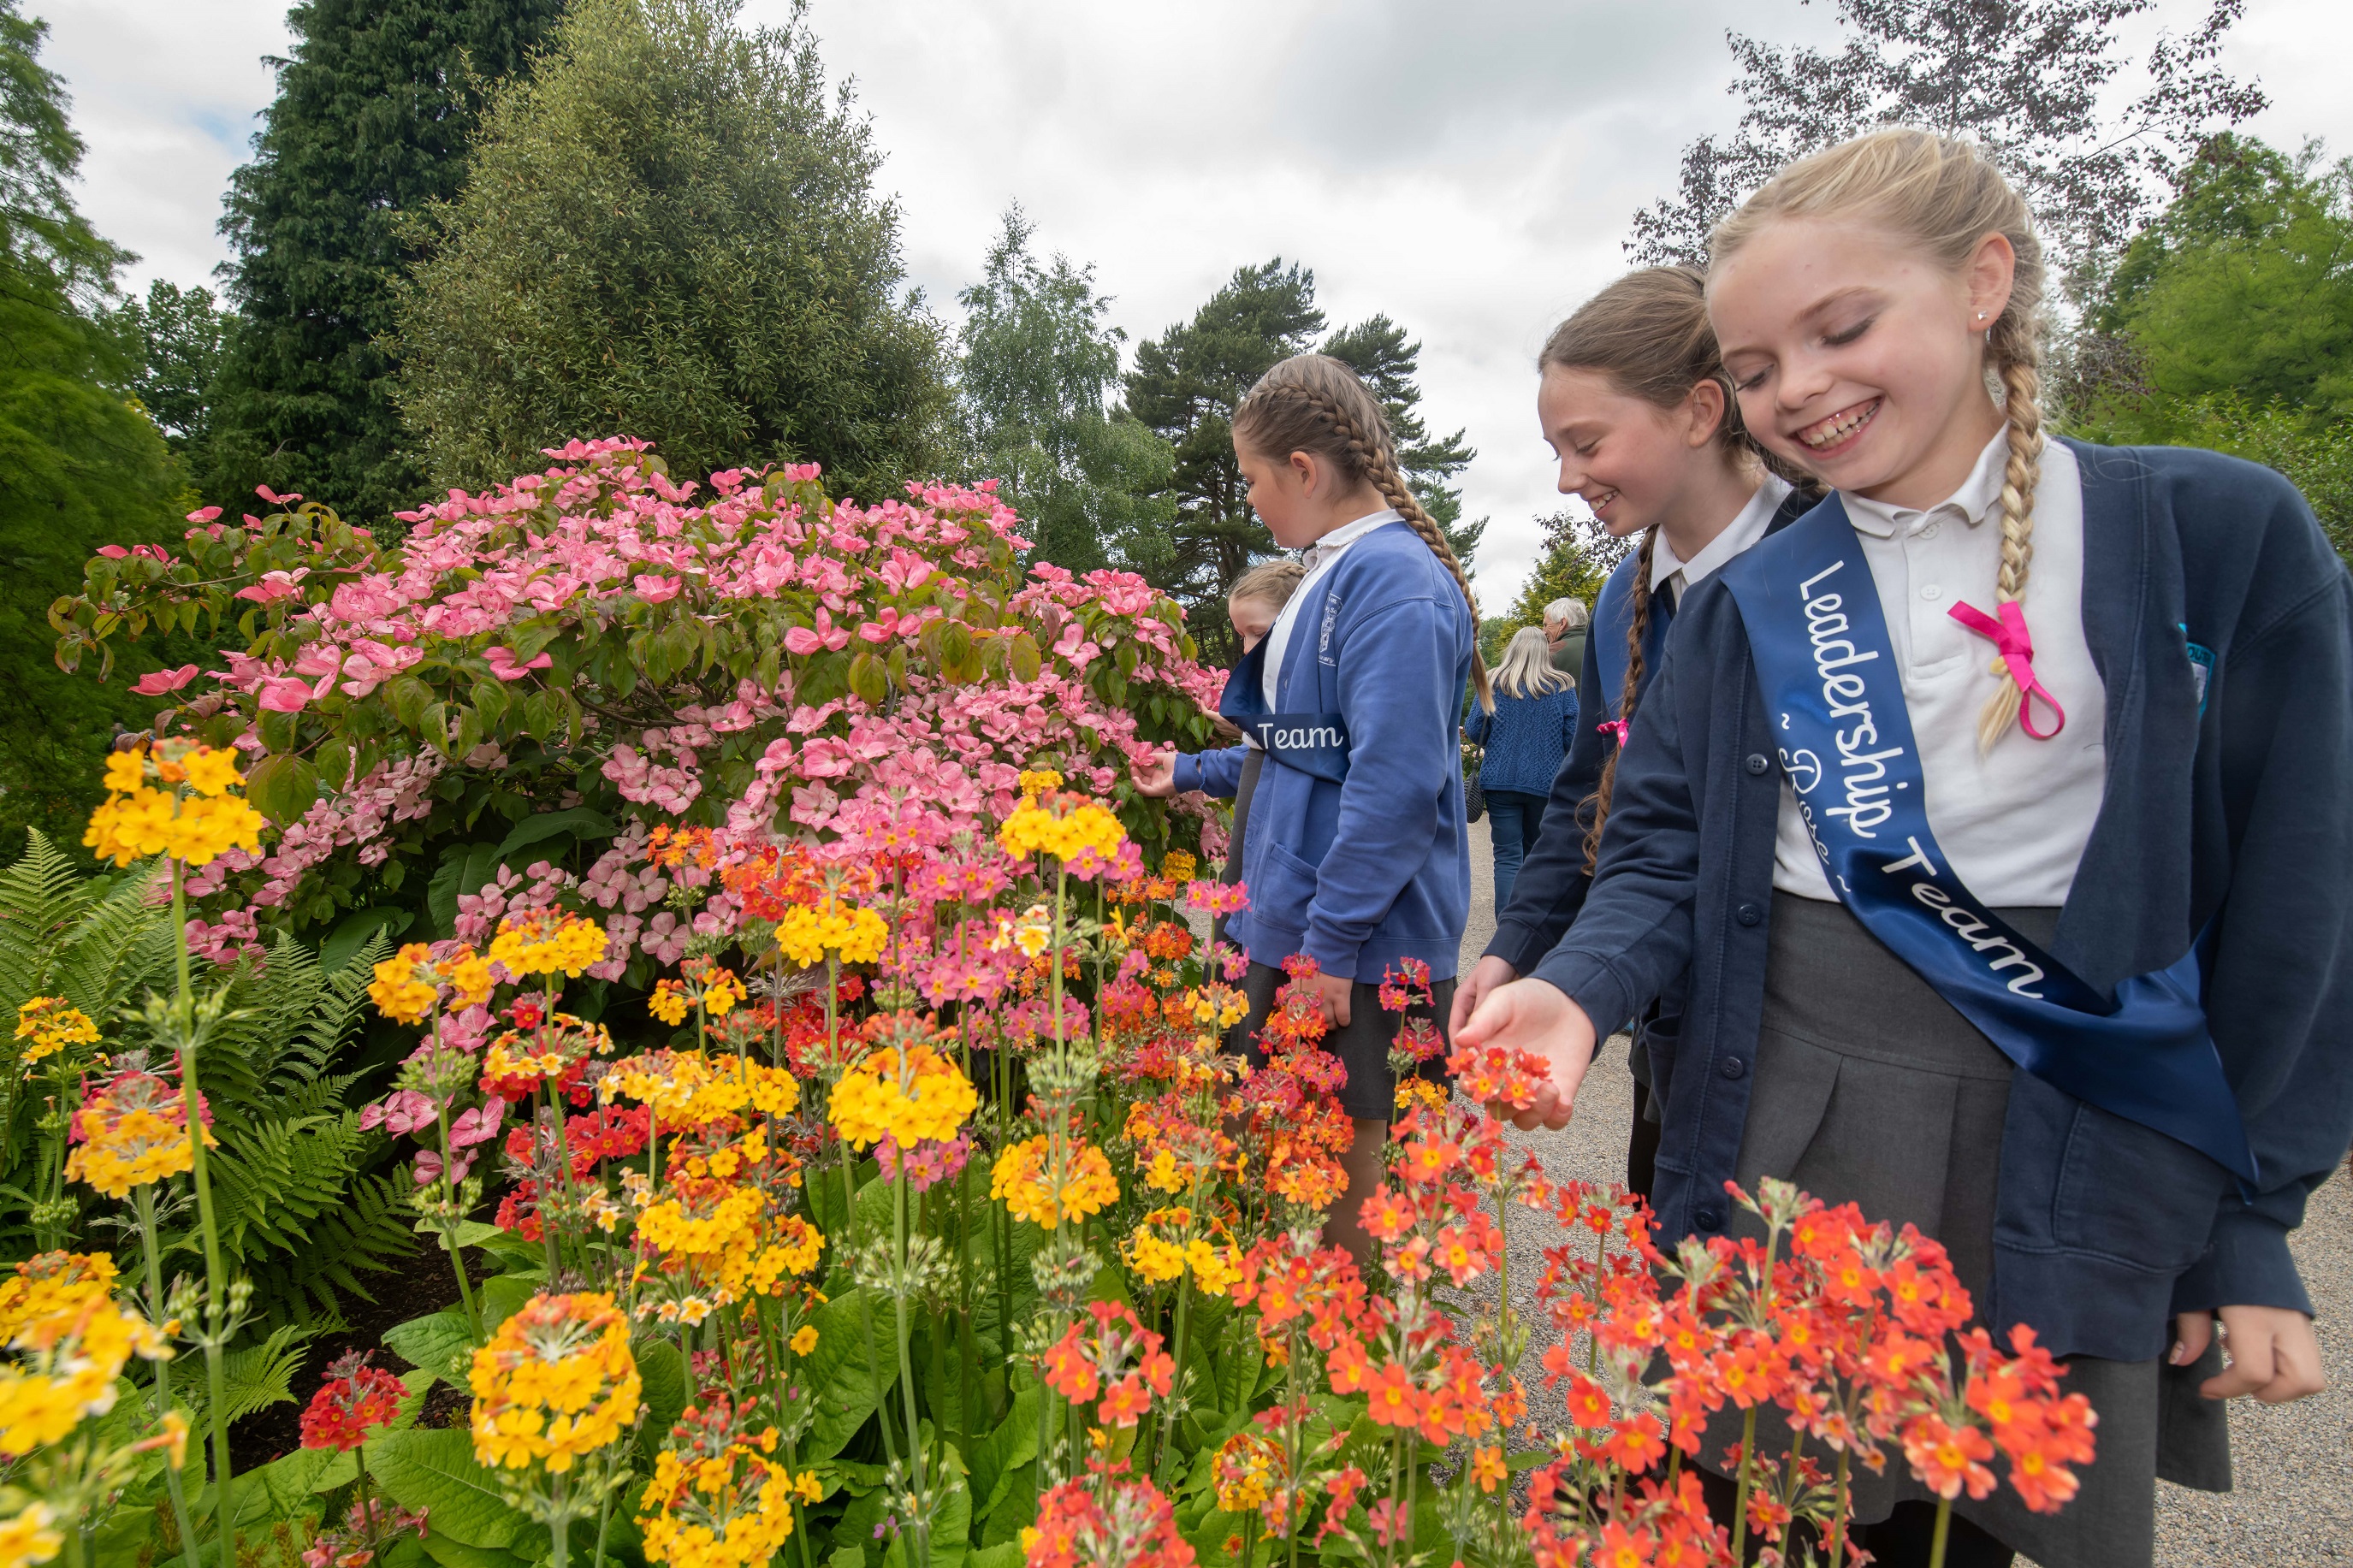 Pupils from schools in Bedale, Colburn, Northallerton, York and Harrogate took part in the Healthy Schools Summer event at RHS Garden Harlow Carr.